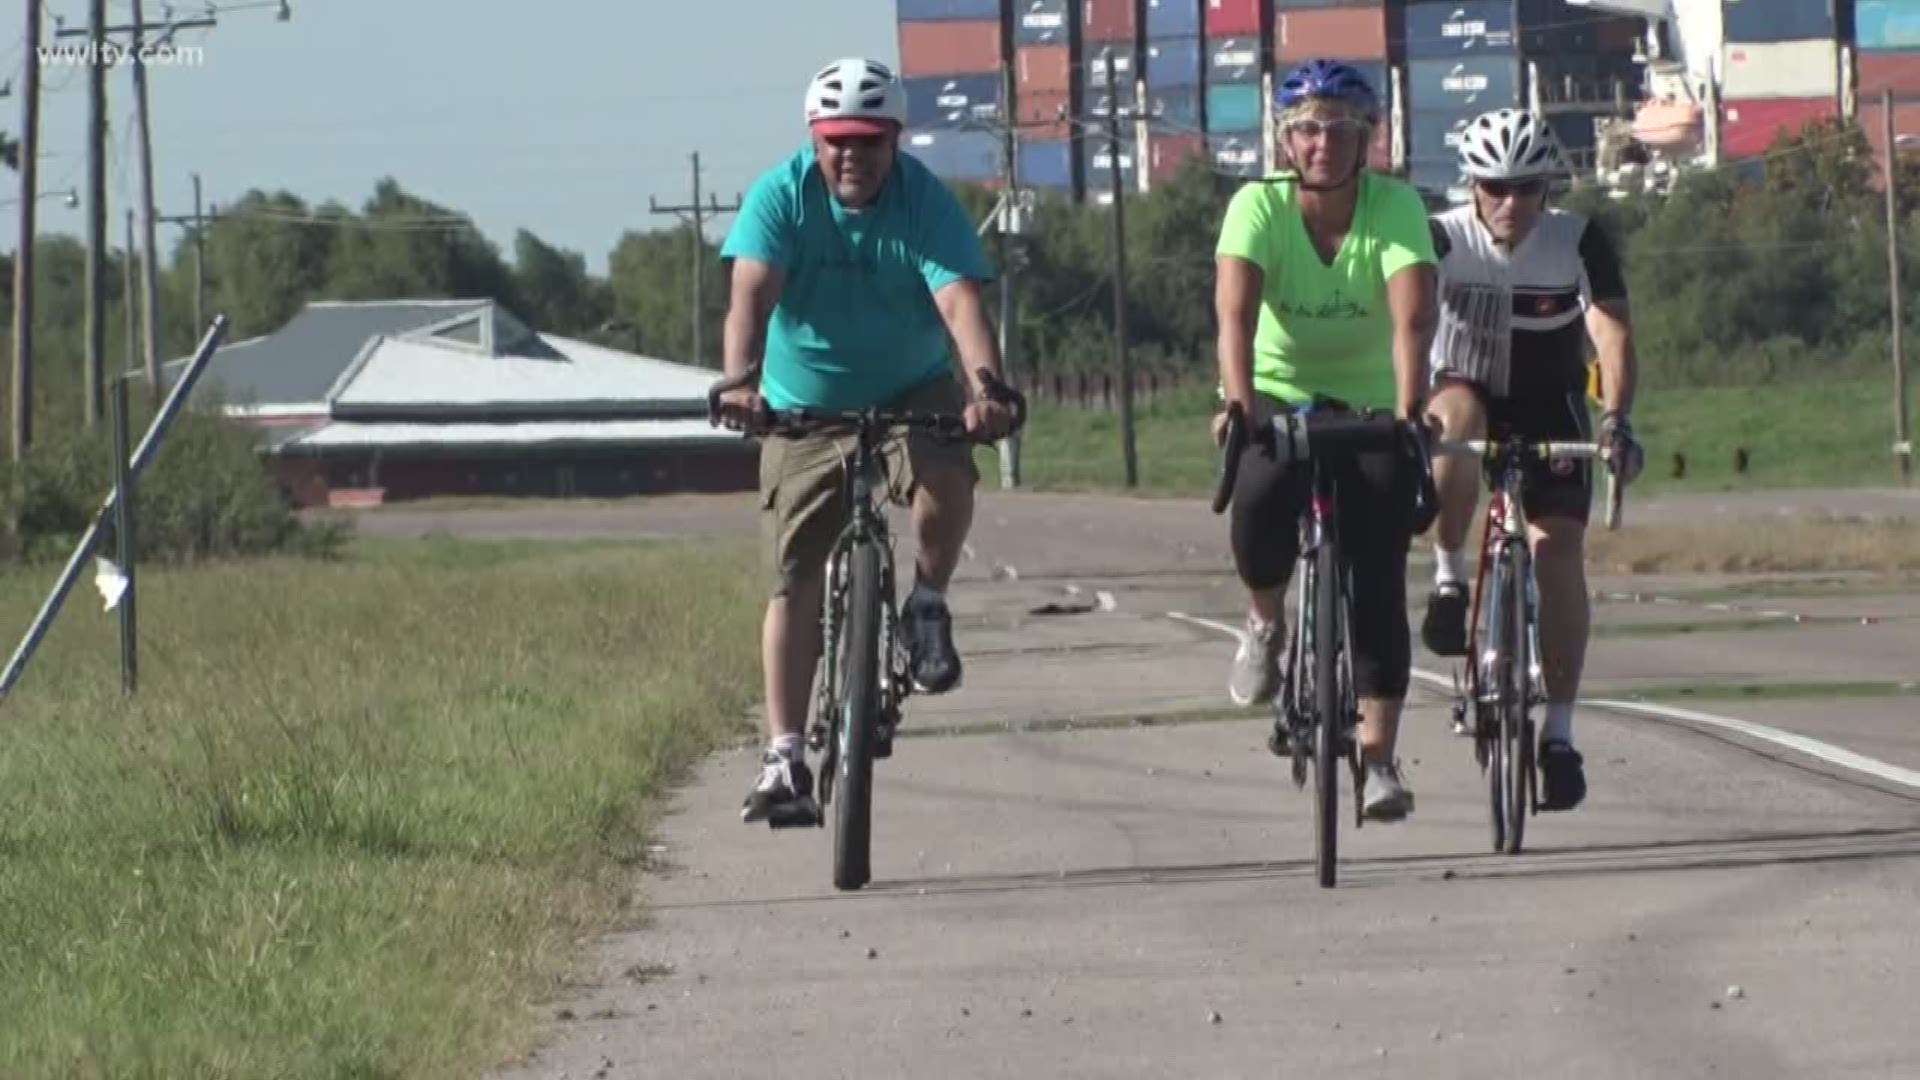 A mother whose son died in the Mississippi River wanted to honor his memory and did so by making the bike trip he always hoped to do - going the length of the Mississippi River.